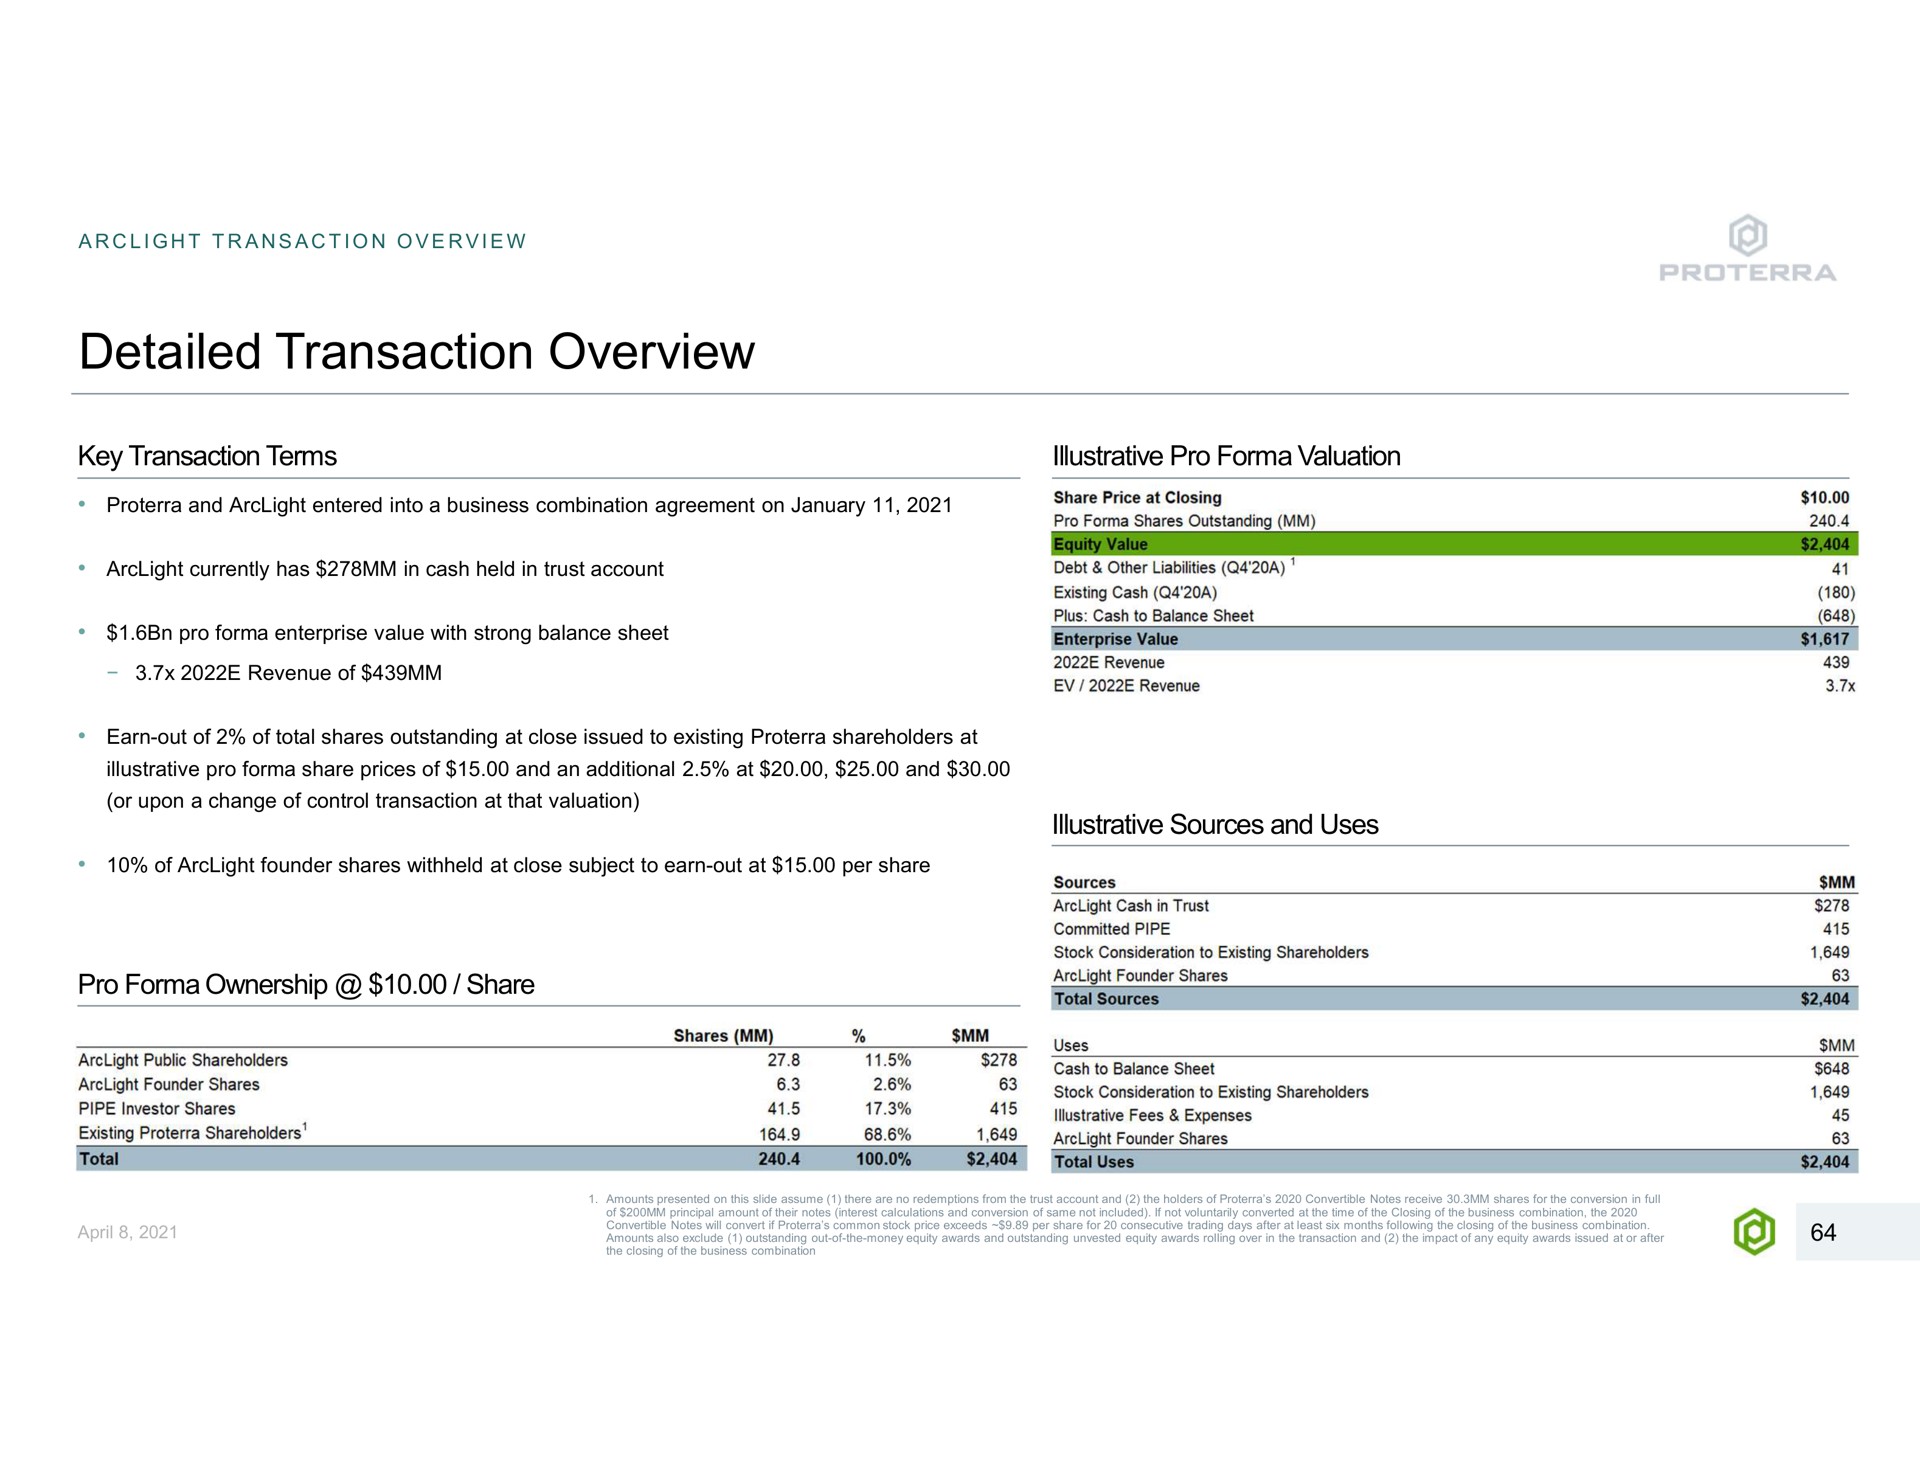 detailed transaction overview key terms illustrative pro valuation and entered into a business combination agreement on currently has in cash held in trust account pro enterprise value with strong balance sheet revenue of earn out of of total shares outstanding at close issued to existing shareholders at illustrative pro share prices of and an additional at and or upon a change of control at that valuation of founder shares withheld at close subject to earn out at per share pro ownership share public shareholders founder shares pipe investor shares existing shareholders total shares share price at closing pro shares outstanding debt other liabilities a existing cash a plus cash to balance sheet enterprise value revenue revenue illustrative sources and uses sources cash in trust committed pipe stock consideration to existing shareholders founder shares total sources uses cash to balance sheet stock consideration to existing shareholders illustrative fees expenses founder shares total uses amounts presented on this slide assume there are no redemptions from the trust account and the holders of convertible notes receive shares for the conversion in of principal amount of their notes interest calculations and conversion of same not included if not voluntarily converted at the time of the closing of the business combination the convertible notes will convert if common stock price exceeds per share for consecutive trading days after at least six months following the closing of the business combination amounts also exclude outstanding out of the money equity awards and outstanding unvested equity awards rolling over in the and the impact of any equity awards issued at or after the closing of the business combination full | Proterra